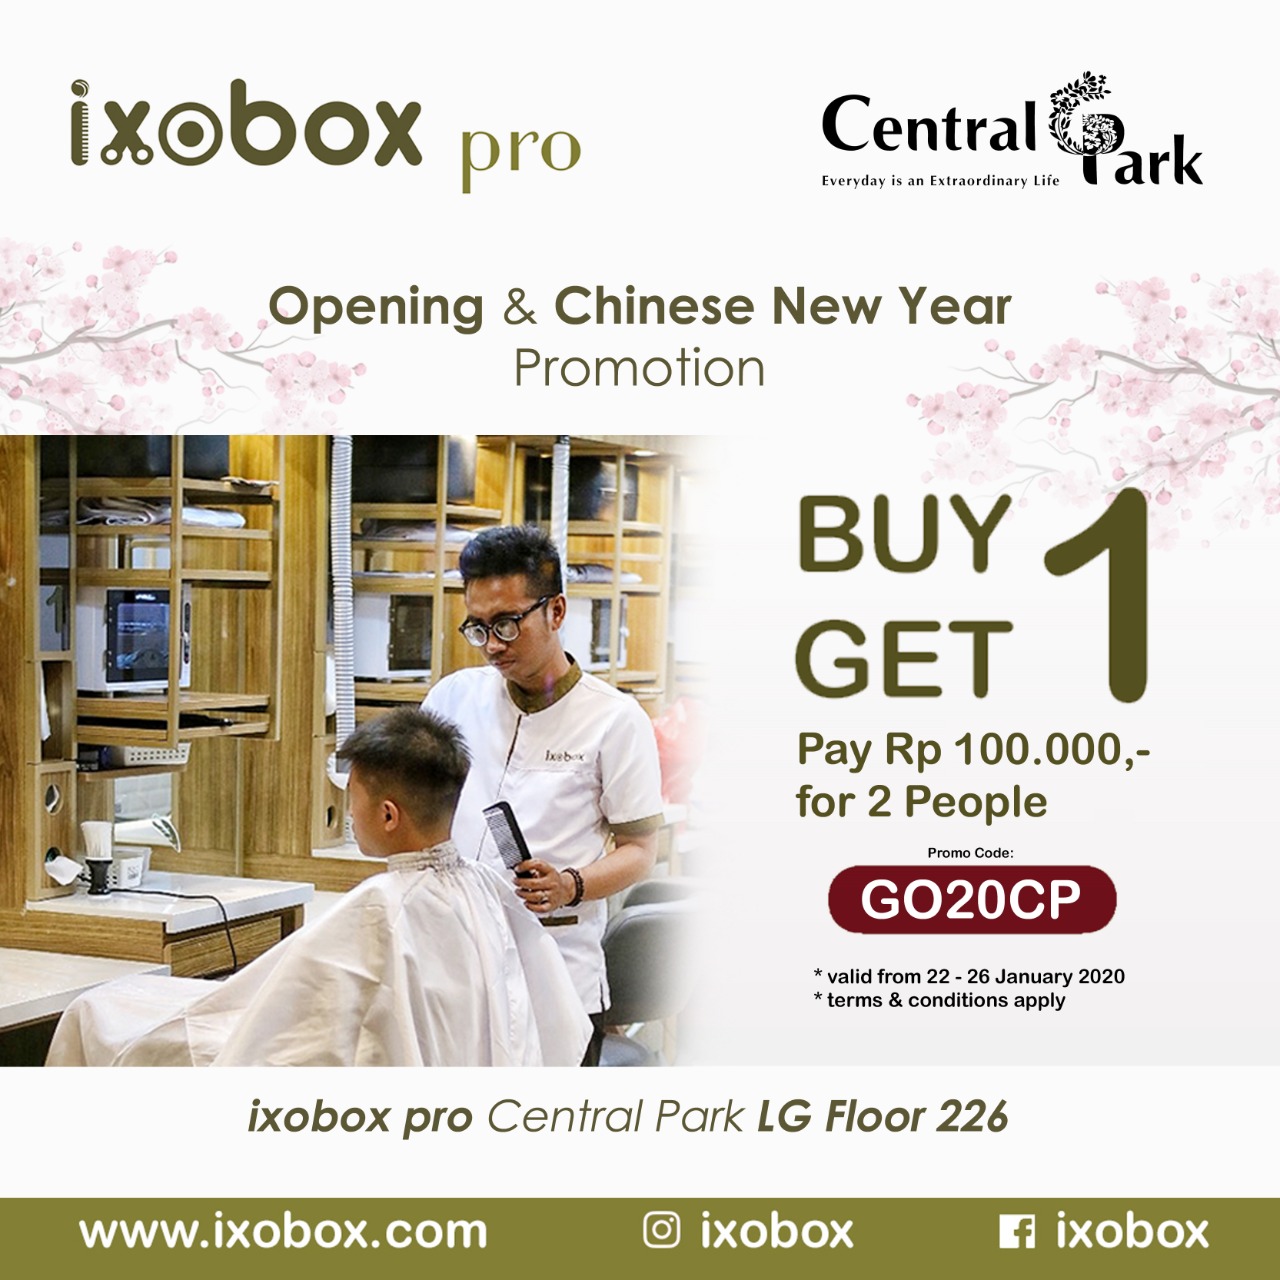 IXOBOX CENTRAL PARK IS NOW OPEN! | CENTRAL PARK MALL JAKARTA